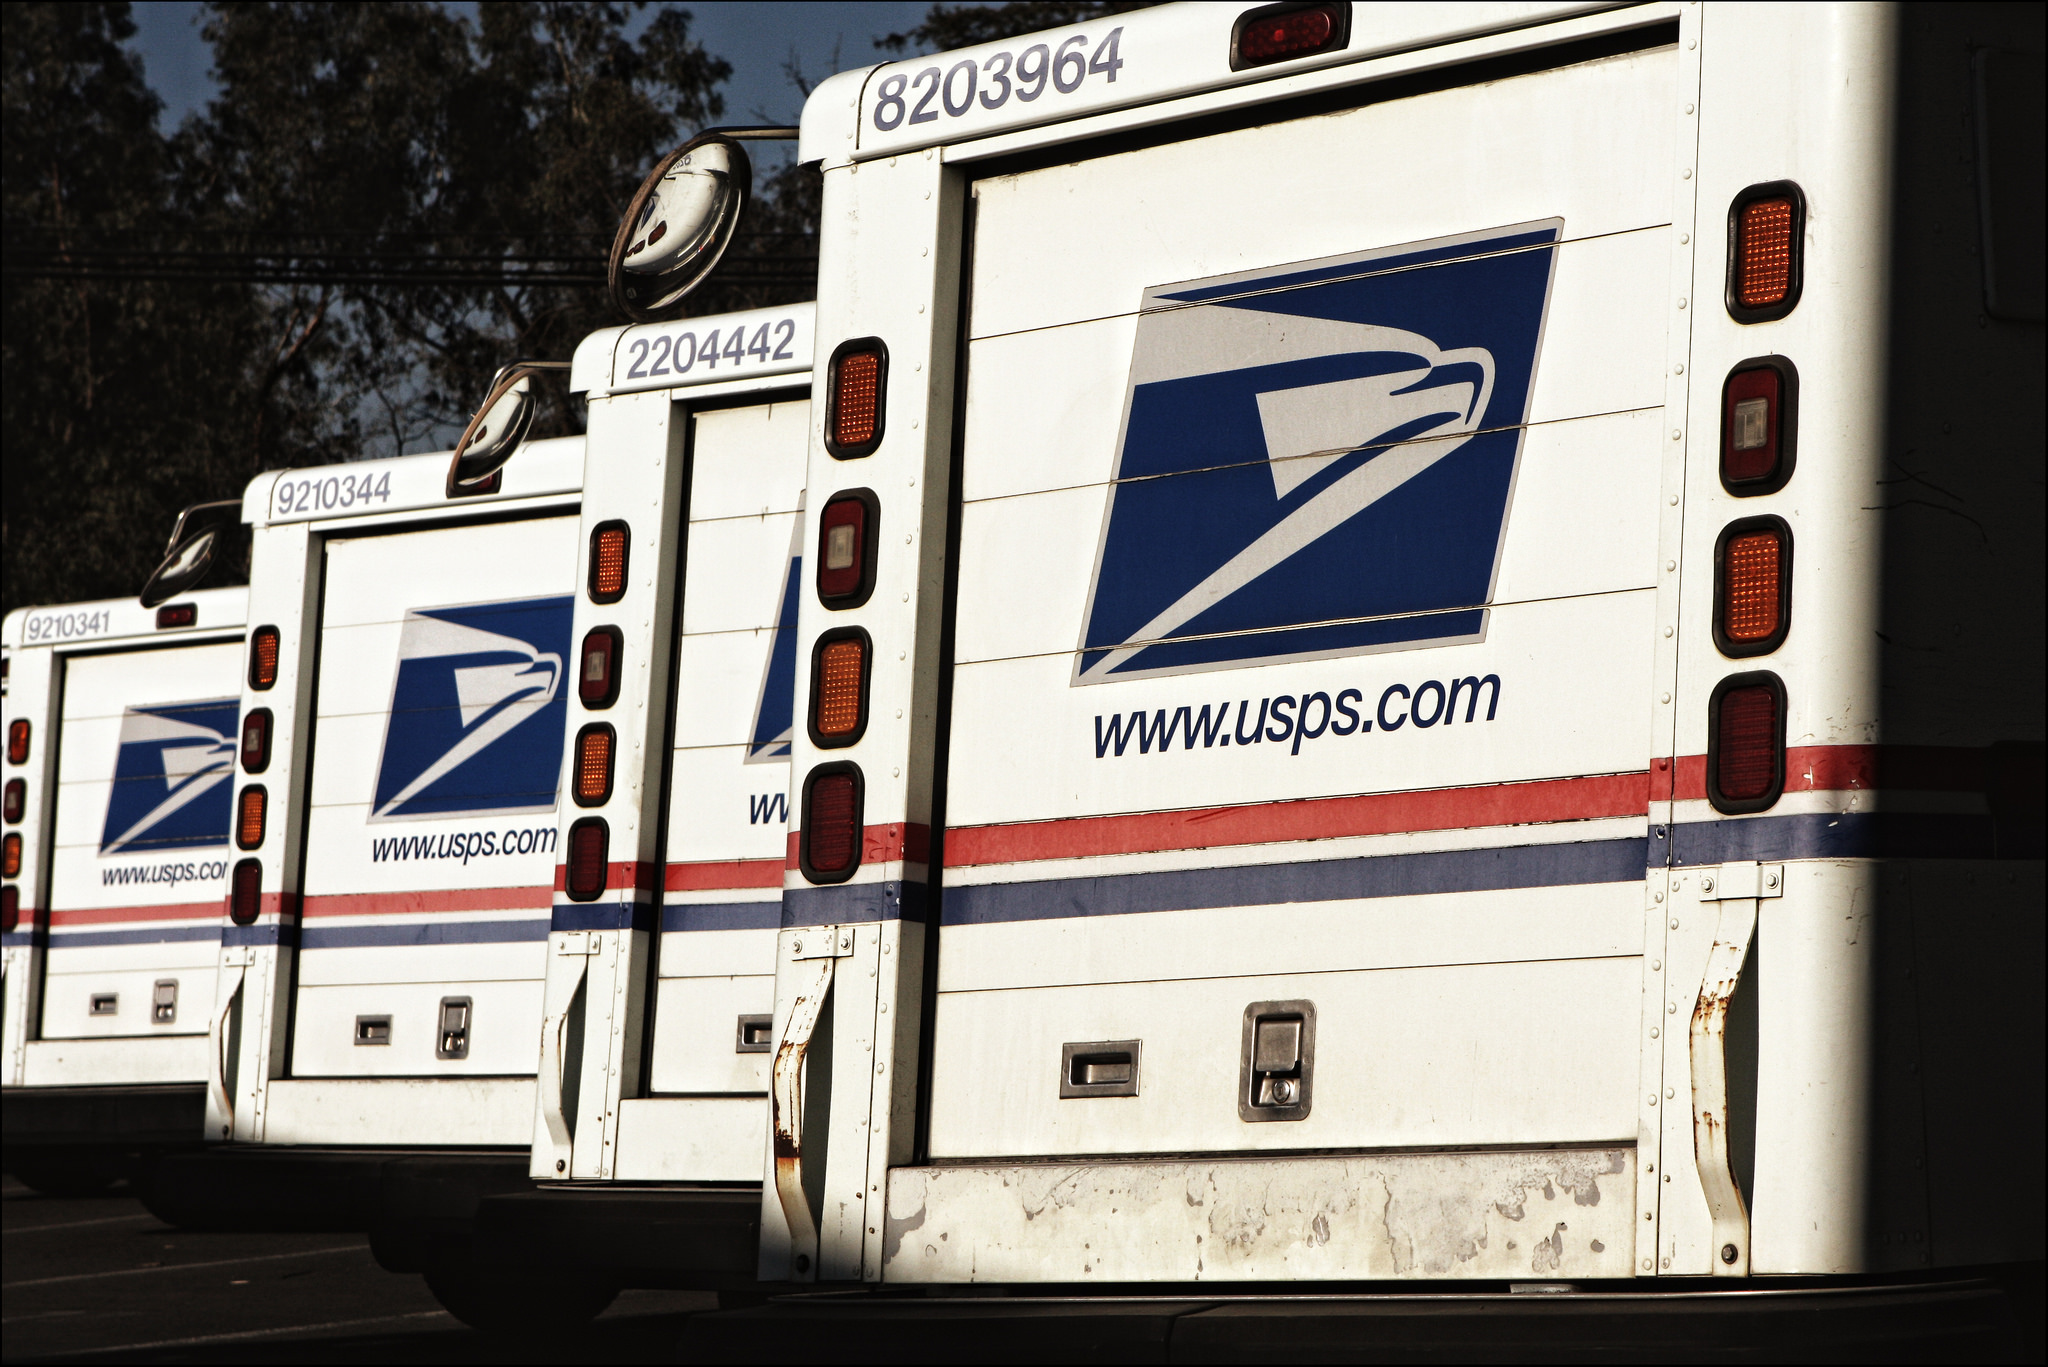 USPS Testing Service That Shows Customers Photos Of Their Mail